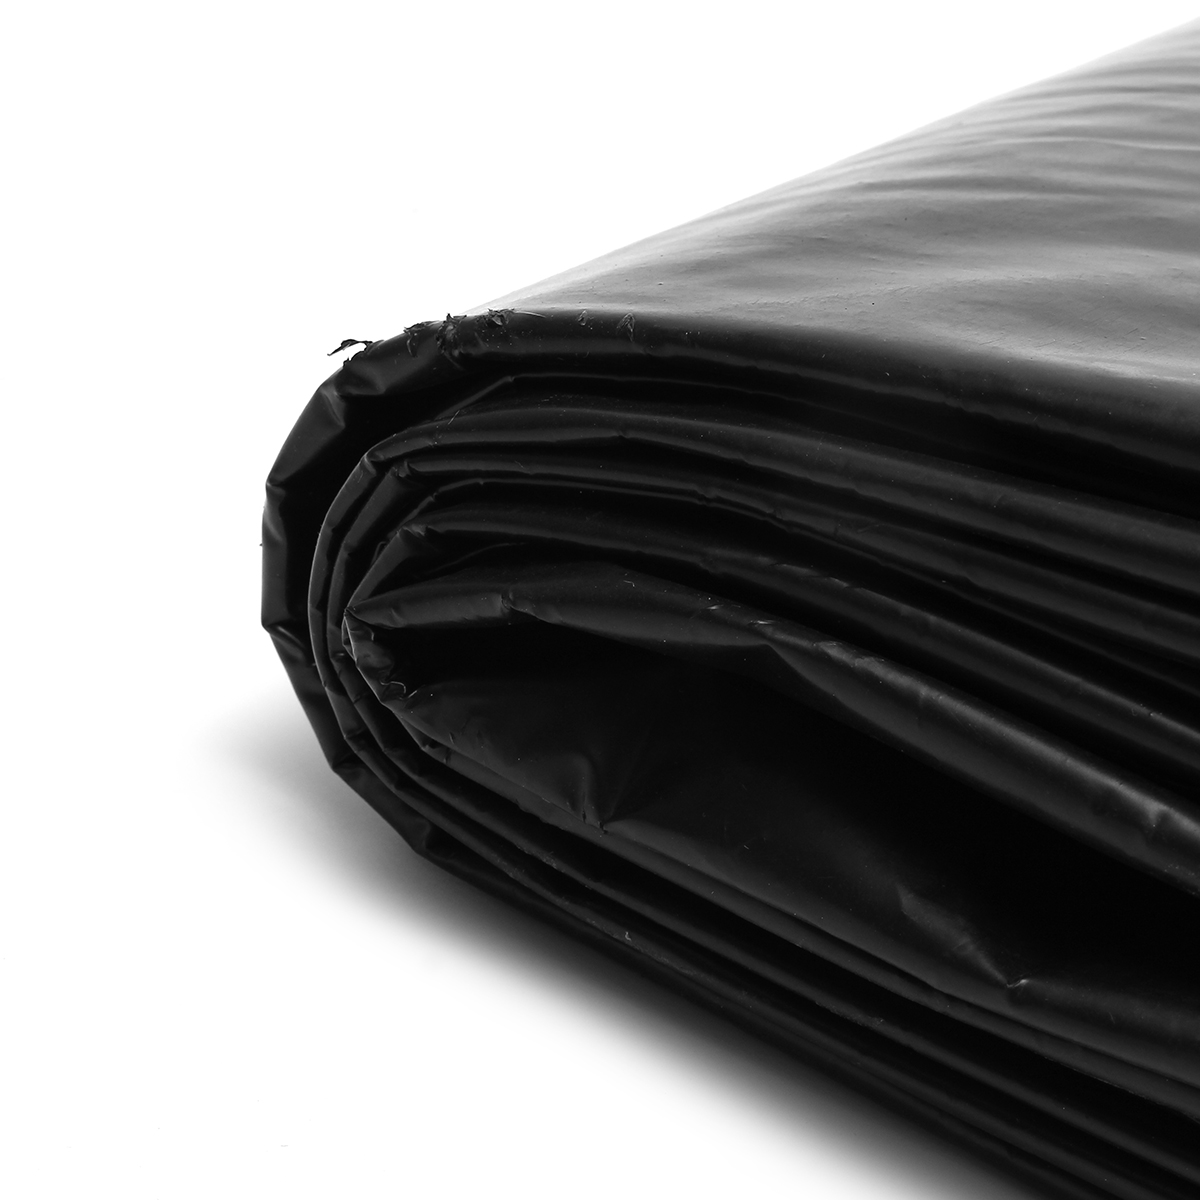 Impermeable-Membrane-Fish-Pond-Liners-Reinforced-HDPE-Durable-for-Garden-Pools-Landscaping-1226891-3